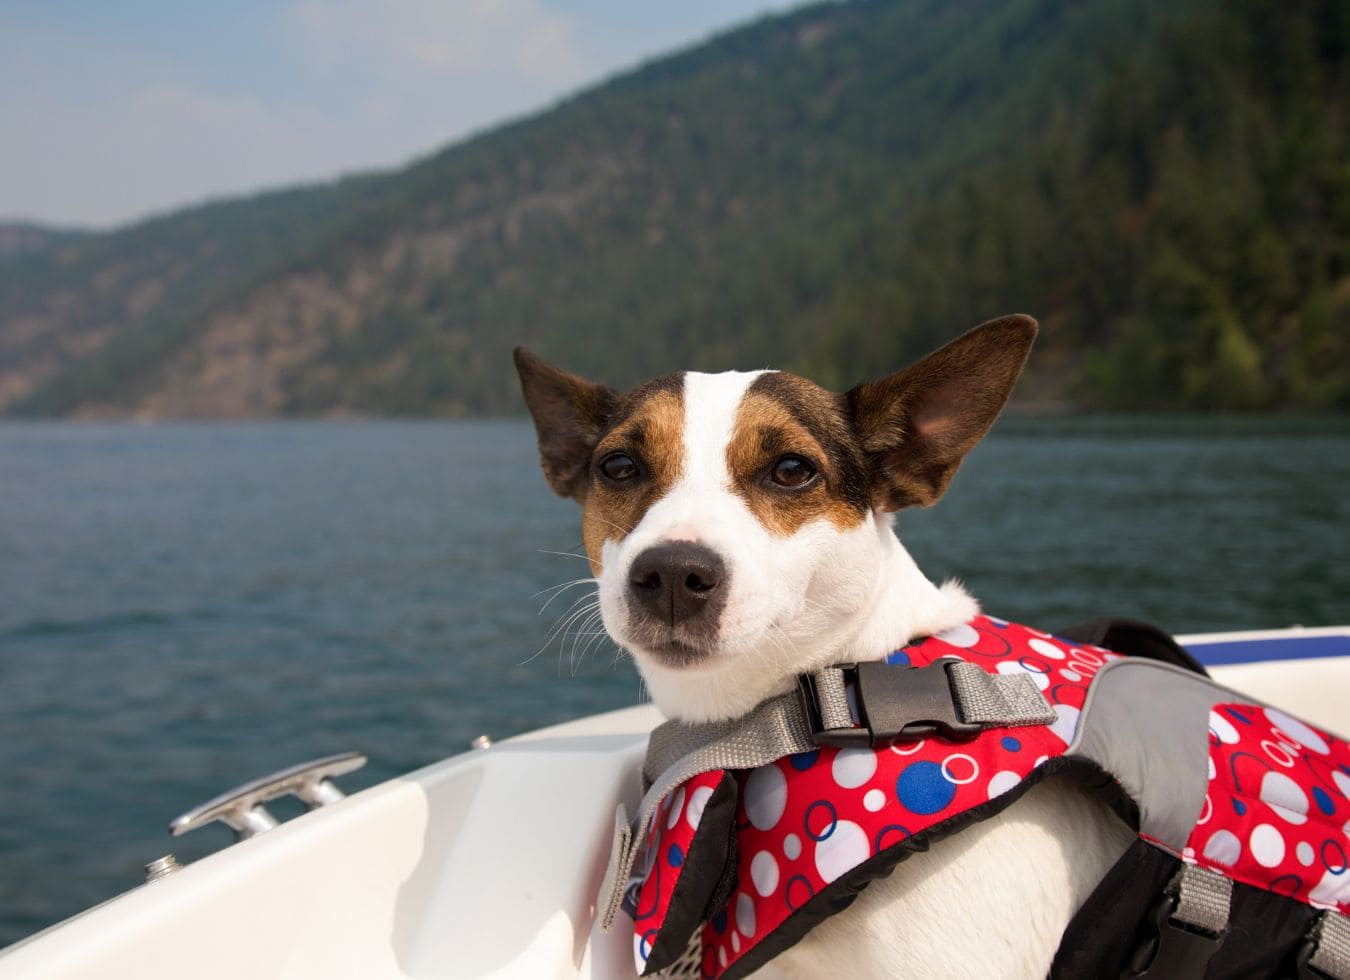 Travelling by boat with pets: Tips for a safe adventure